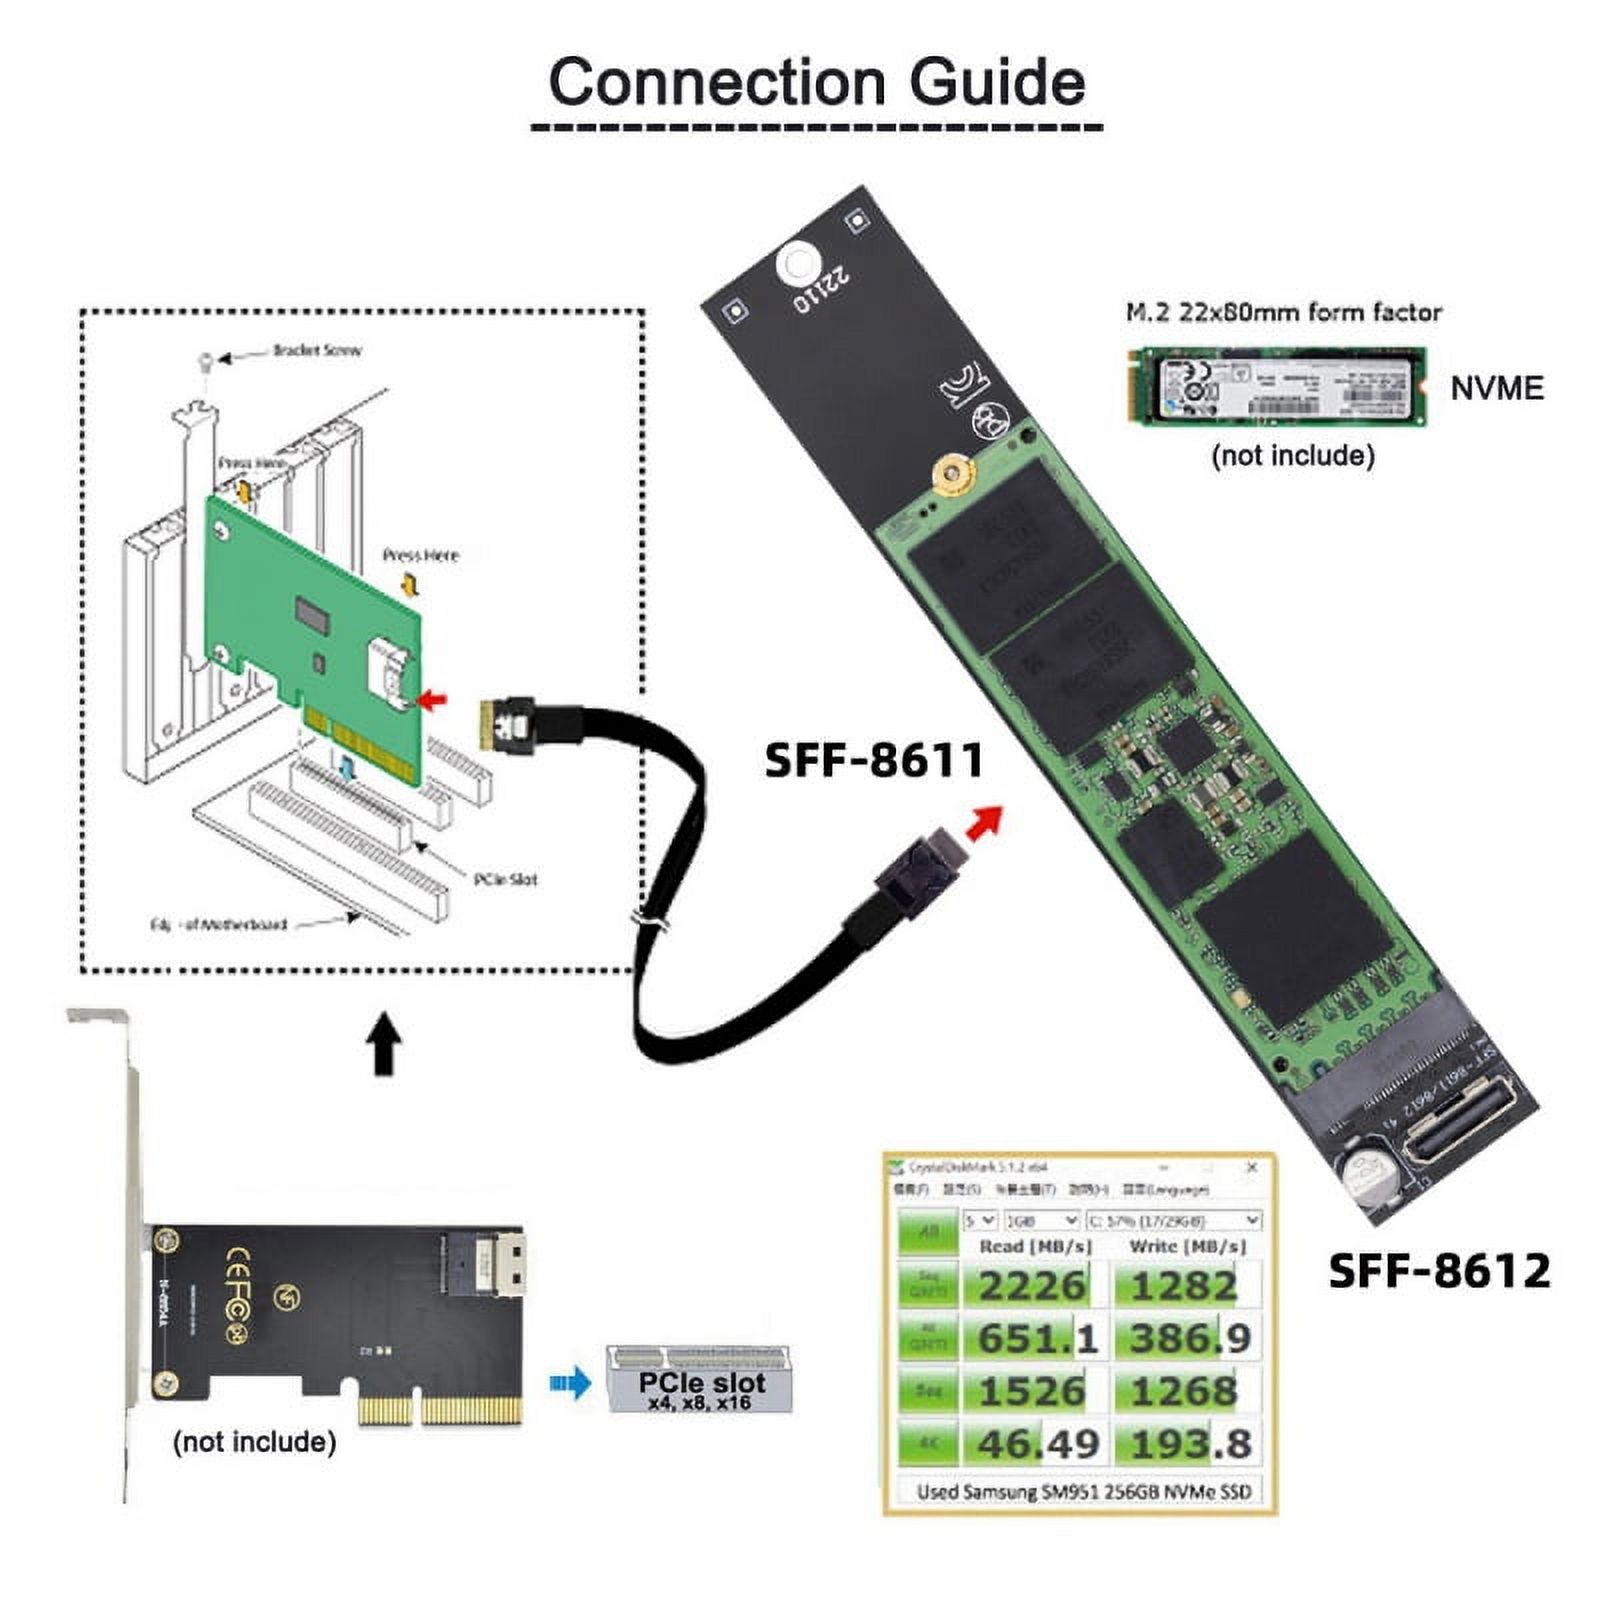 JSER Oculink SFF-8612 SFF-8611 to M.2 Kit NGFF M-Key to NVME PCIe SSD 2280 22110mm Adapter for Mainboard - image 4 of 7